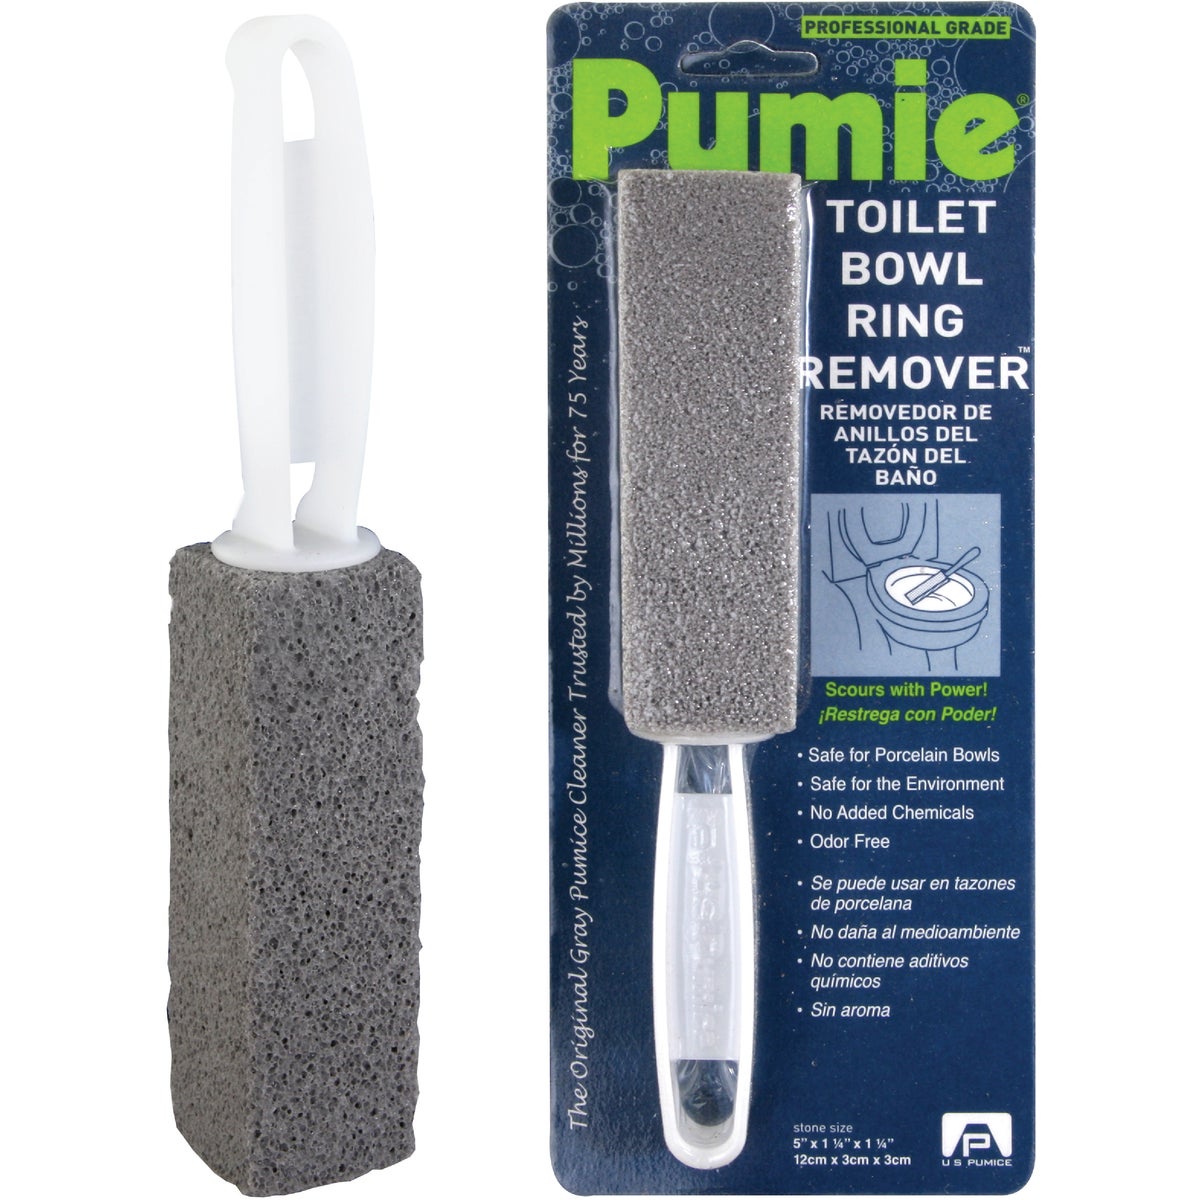 Item 615714, Pumie Toilet Bowl Ring Remover cleans through gentle abrasive action.